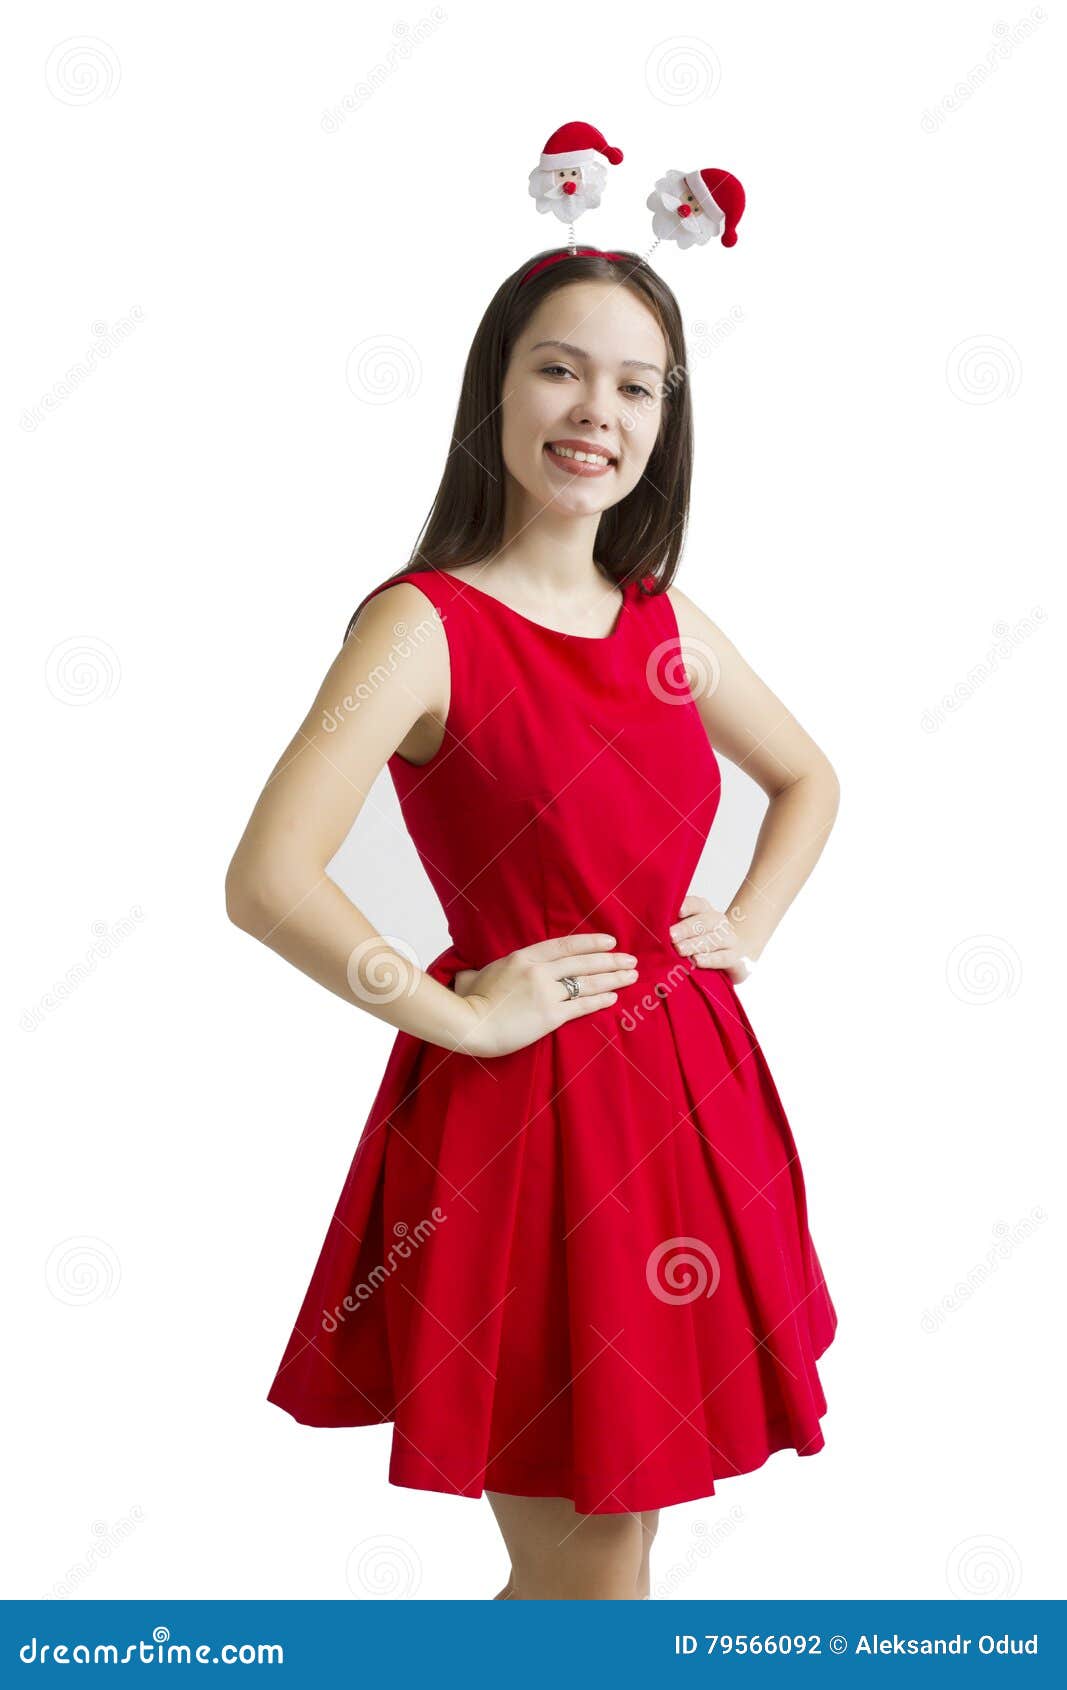 Sensual portrait of a beautiful young woman in a red dress 